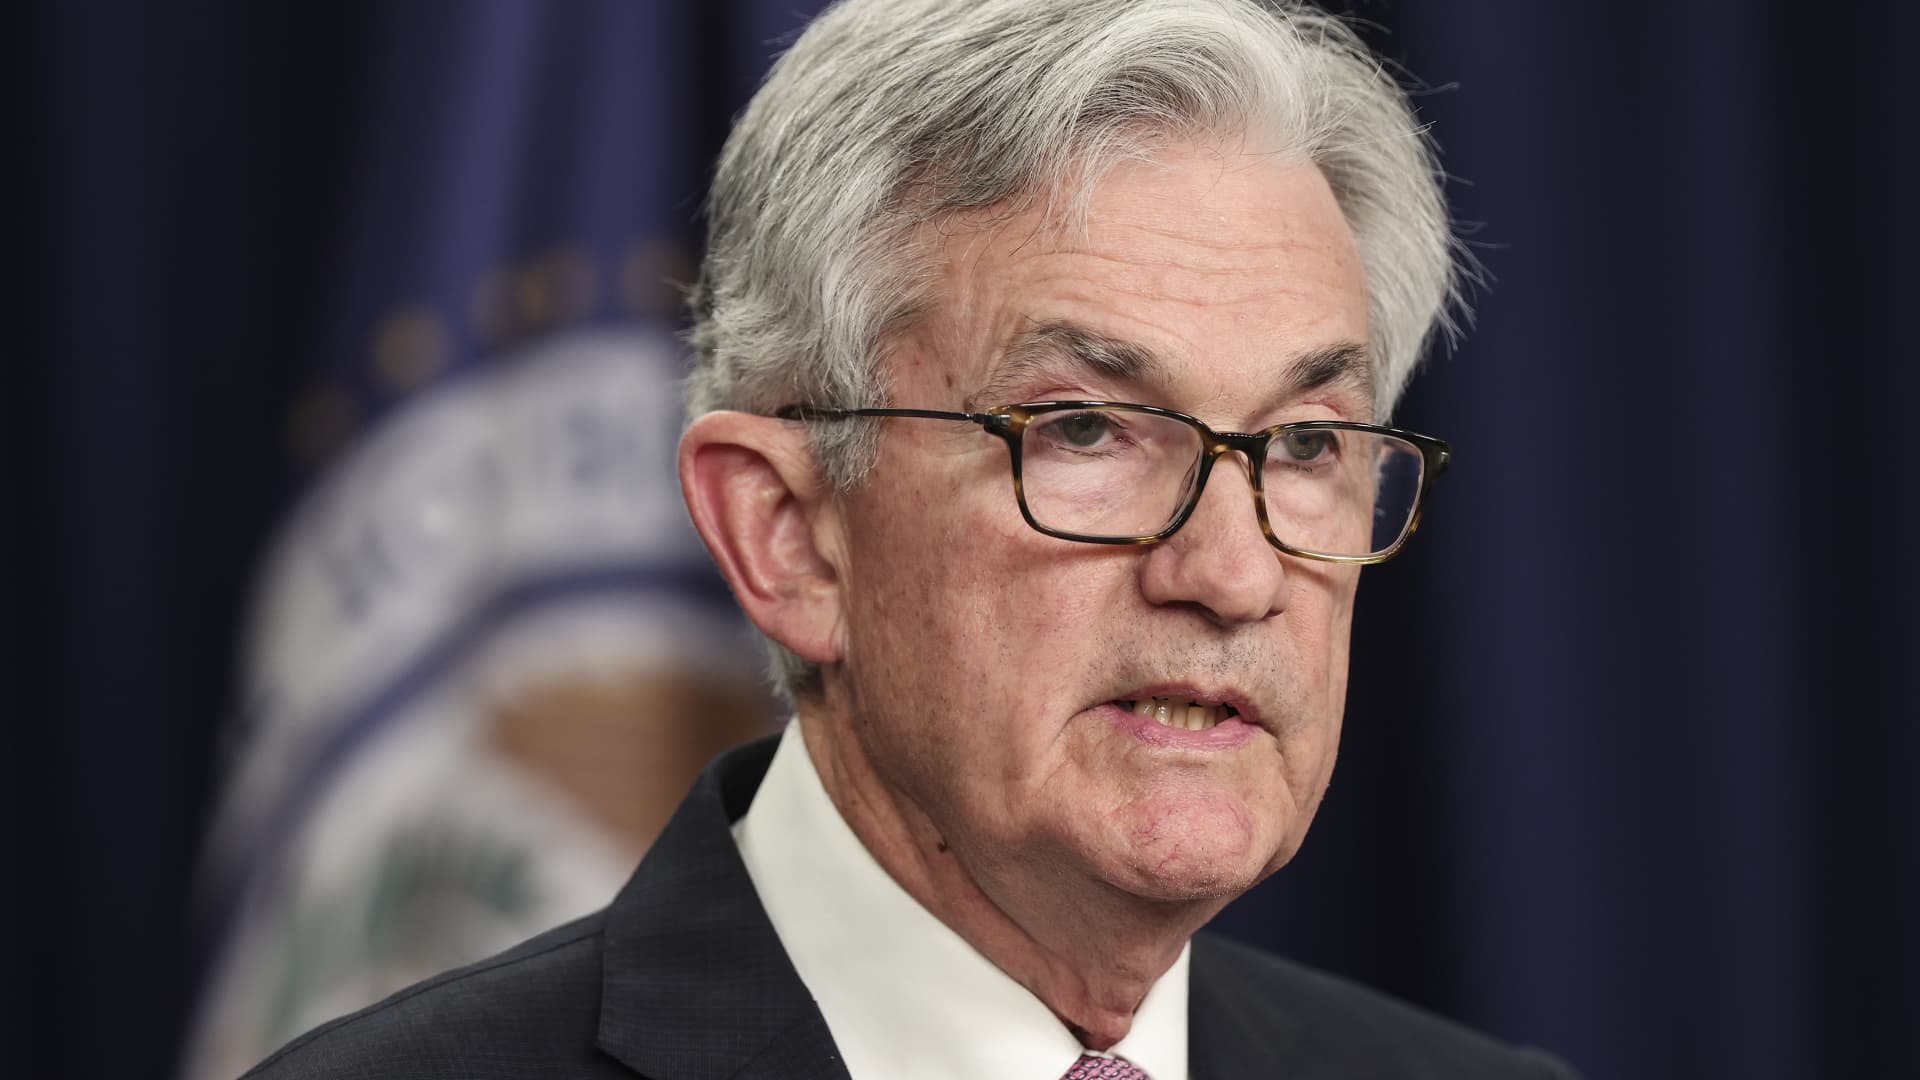 The Fed will raise rates in the week ahead but what Fed chief Powell says may ma..